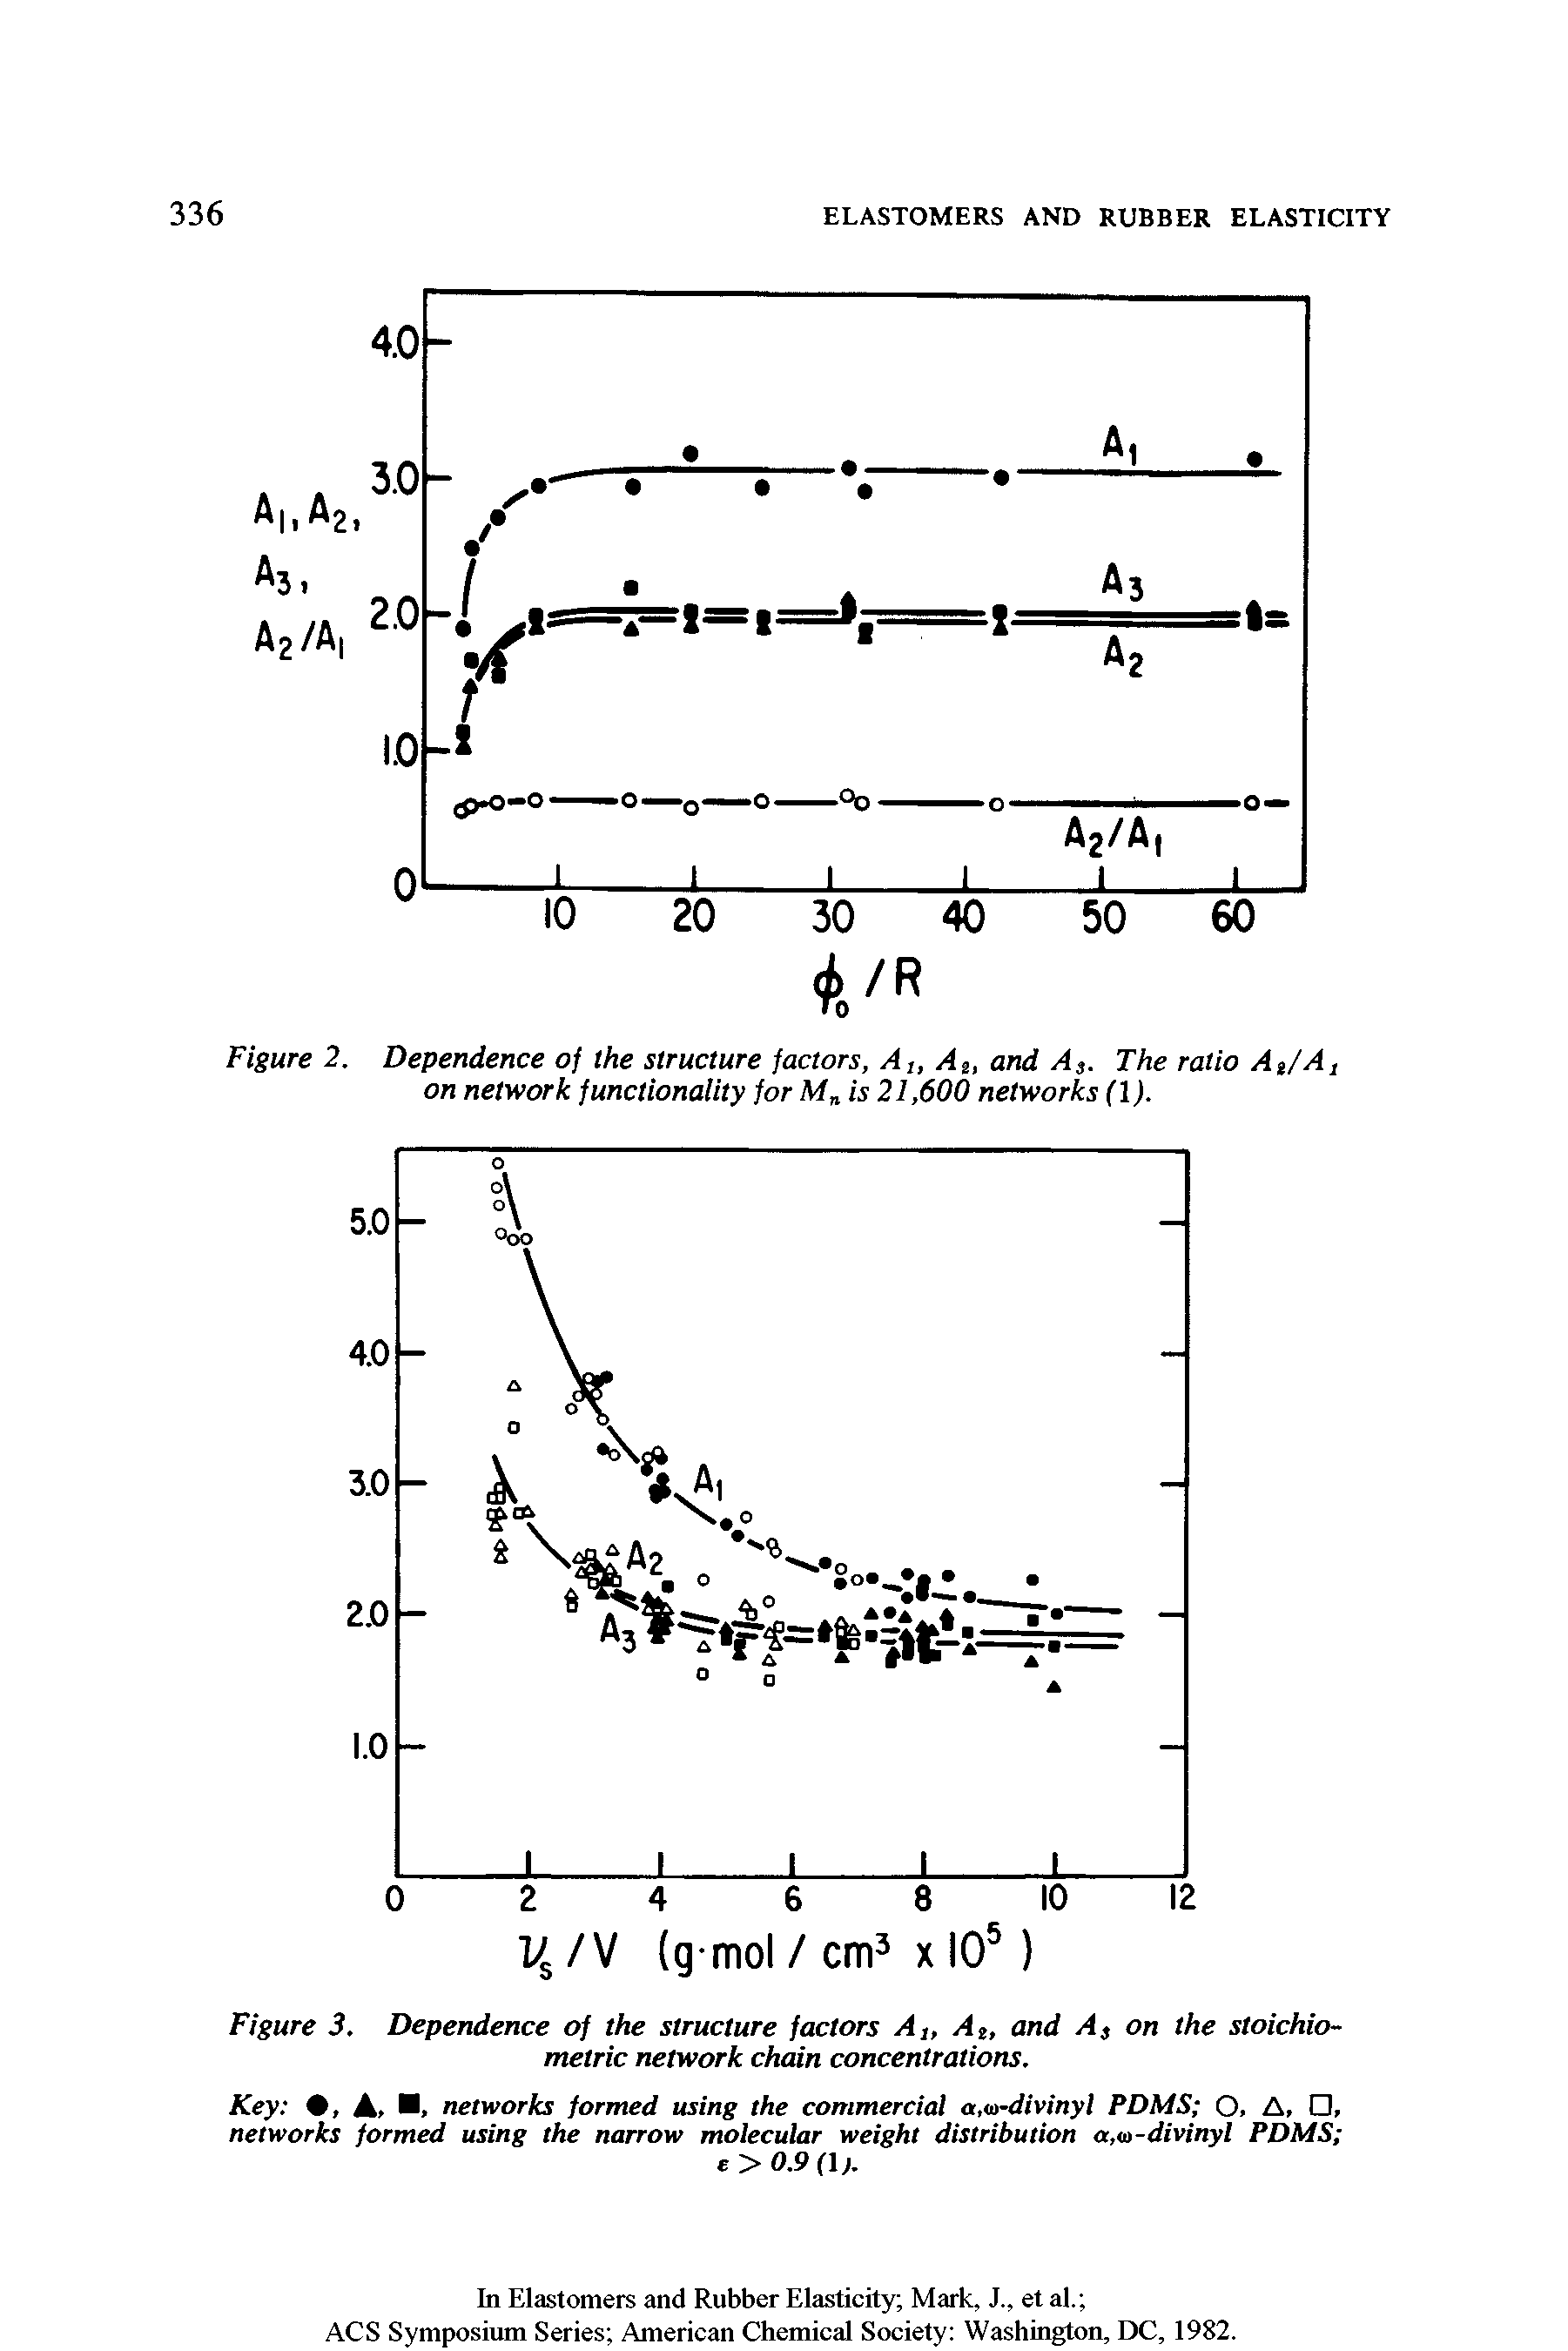 Figure 3. Dependence of the structure factors A, Ae, and As on the stoichiometric network chain concentrations.